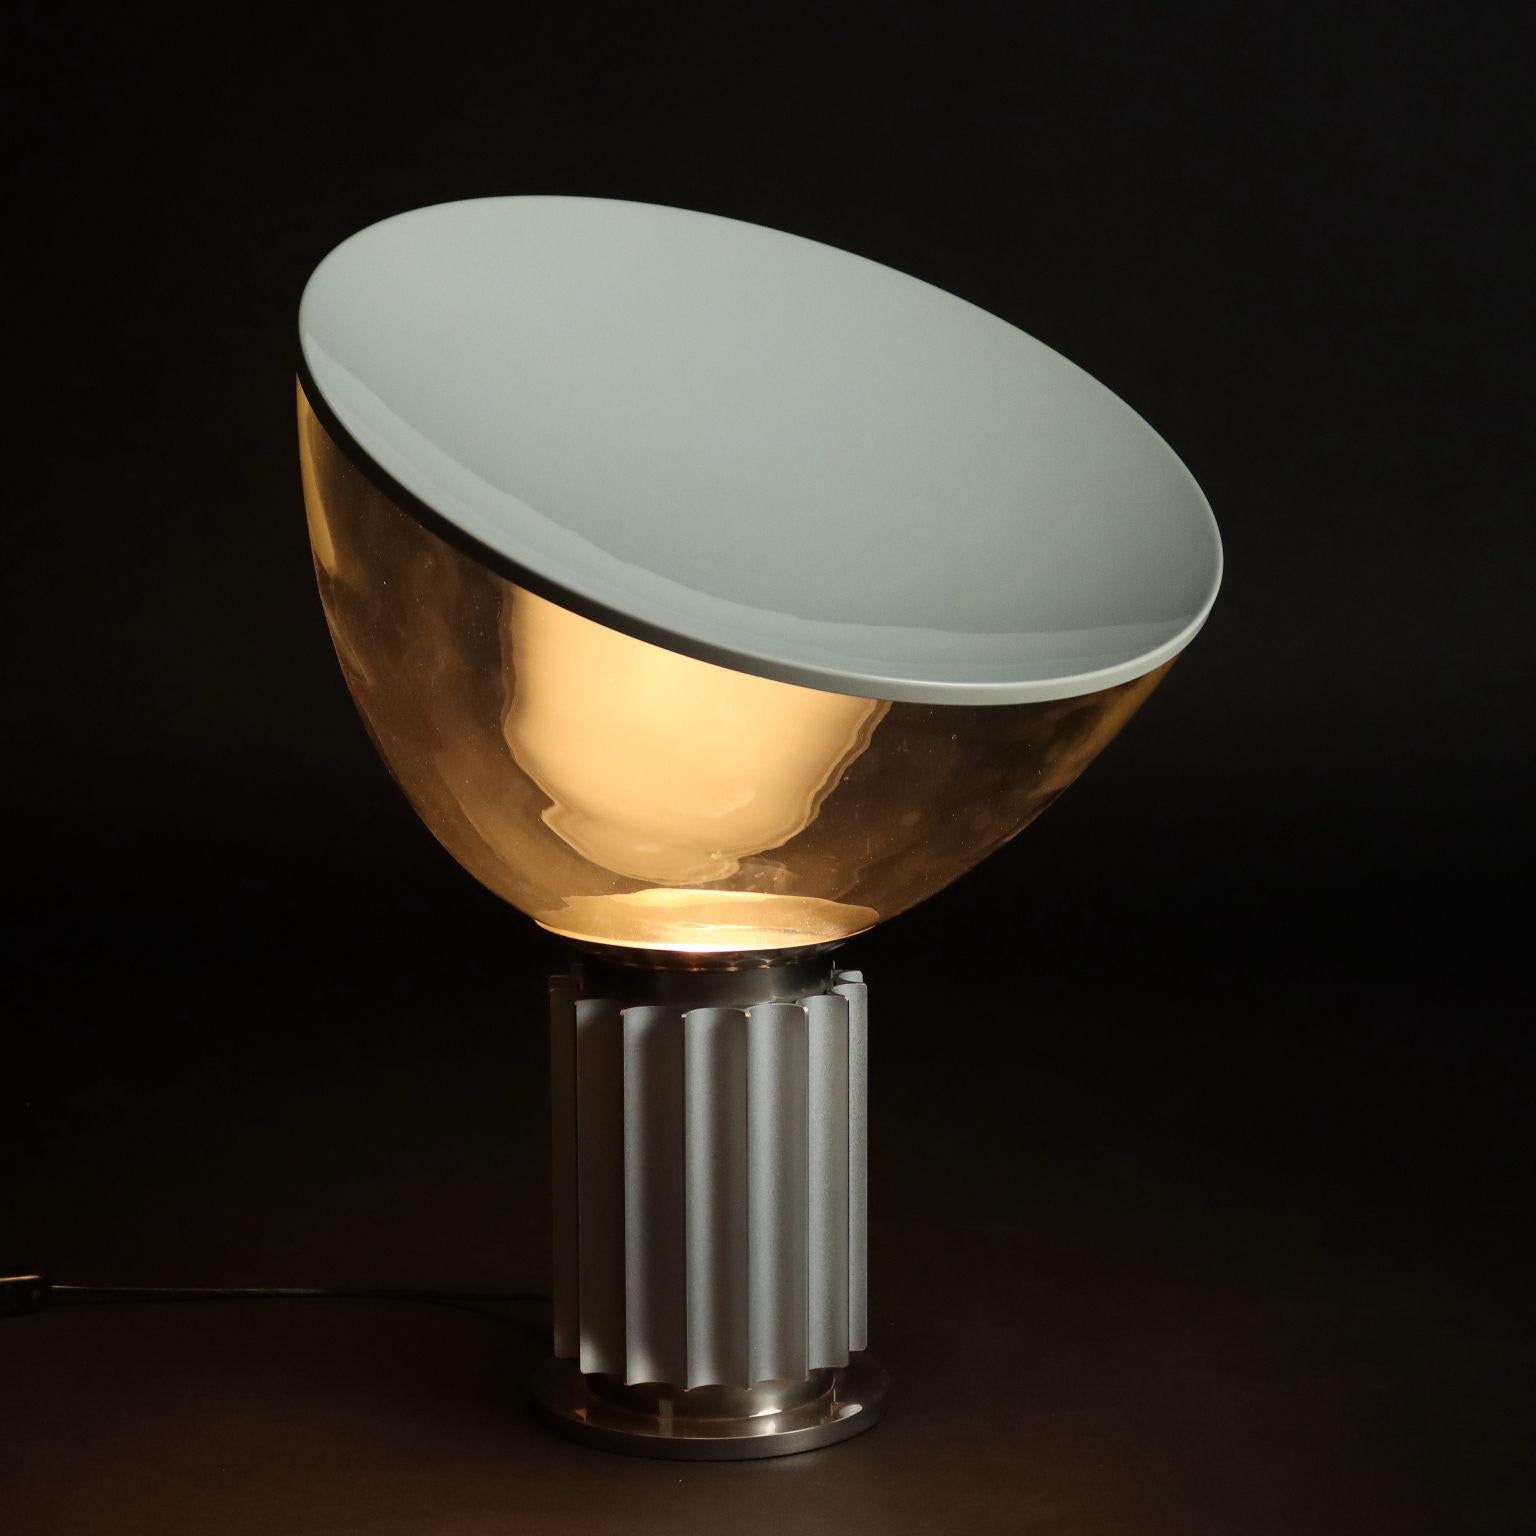 Table lamp with adjustable diffuser for indirect light; base in metal and chromed aluminum, glass and aluminum diffuser.